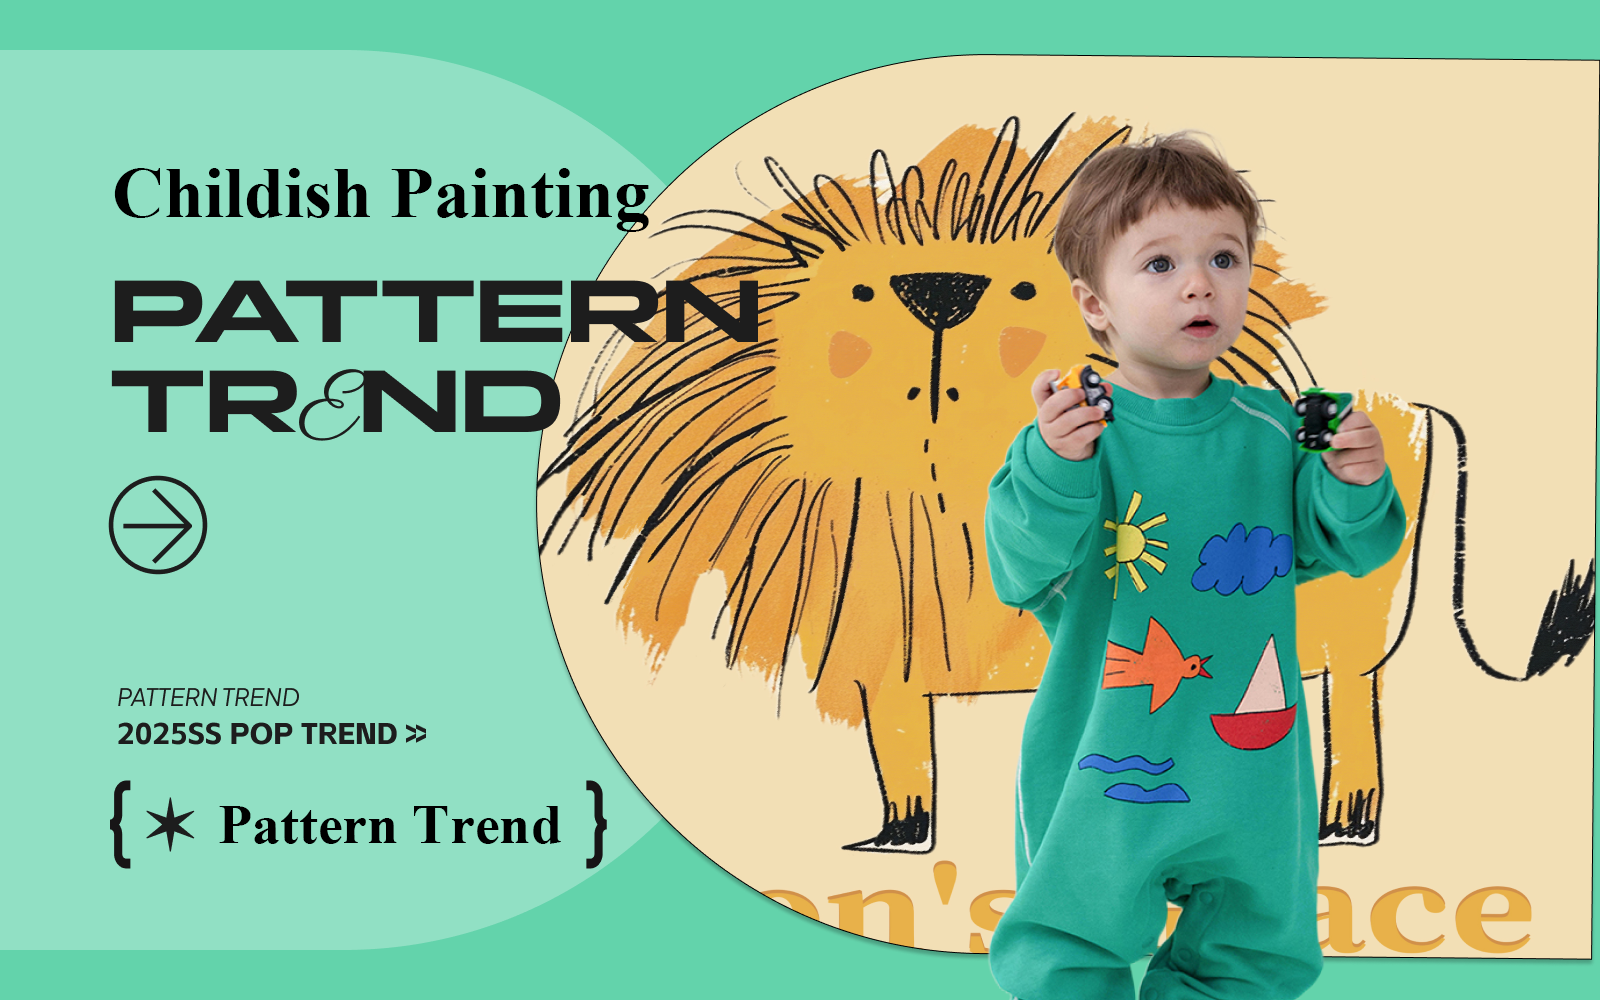 Childish Painting -- The Pattern Trend for Kidswear